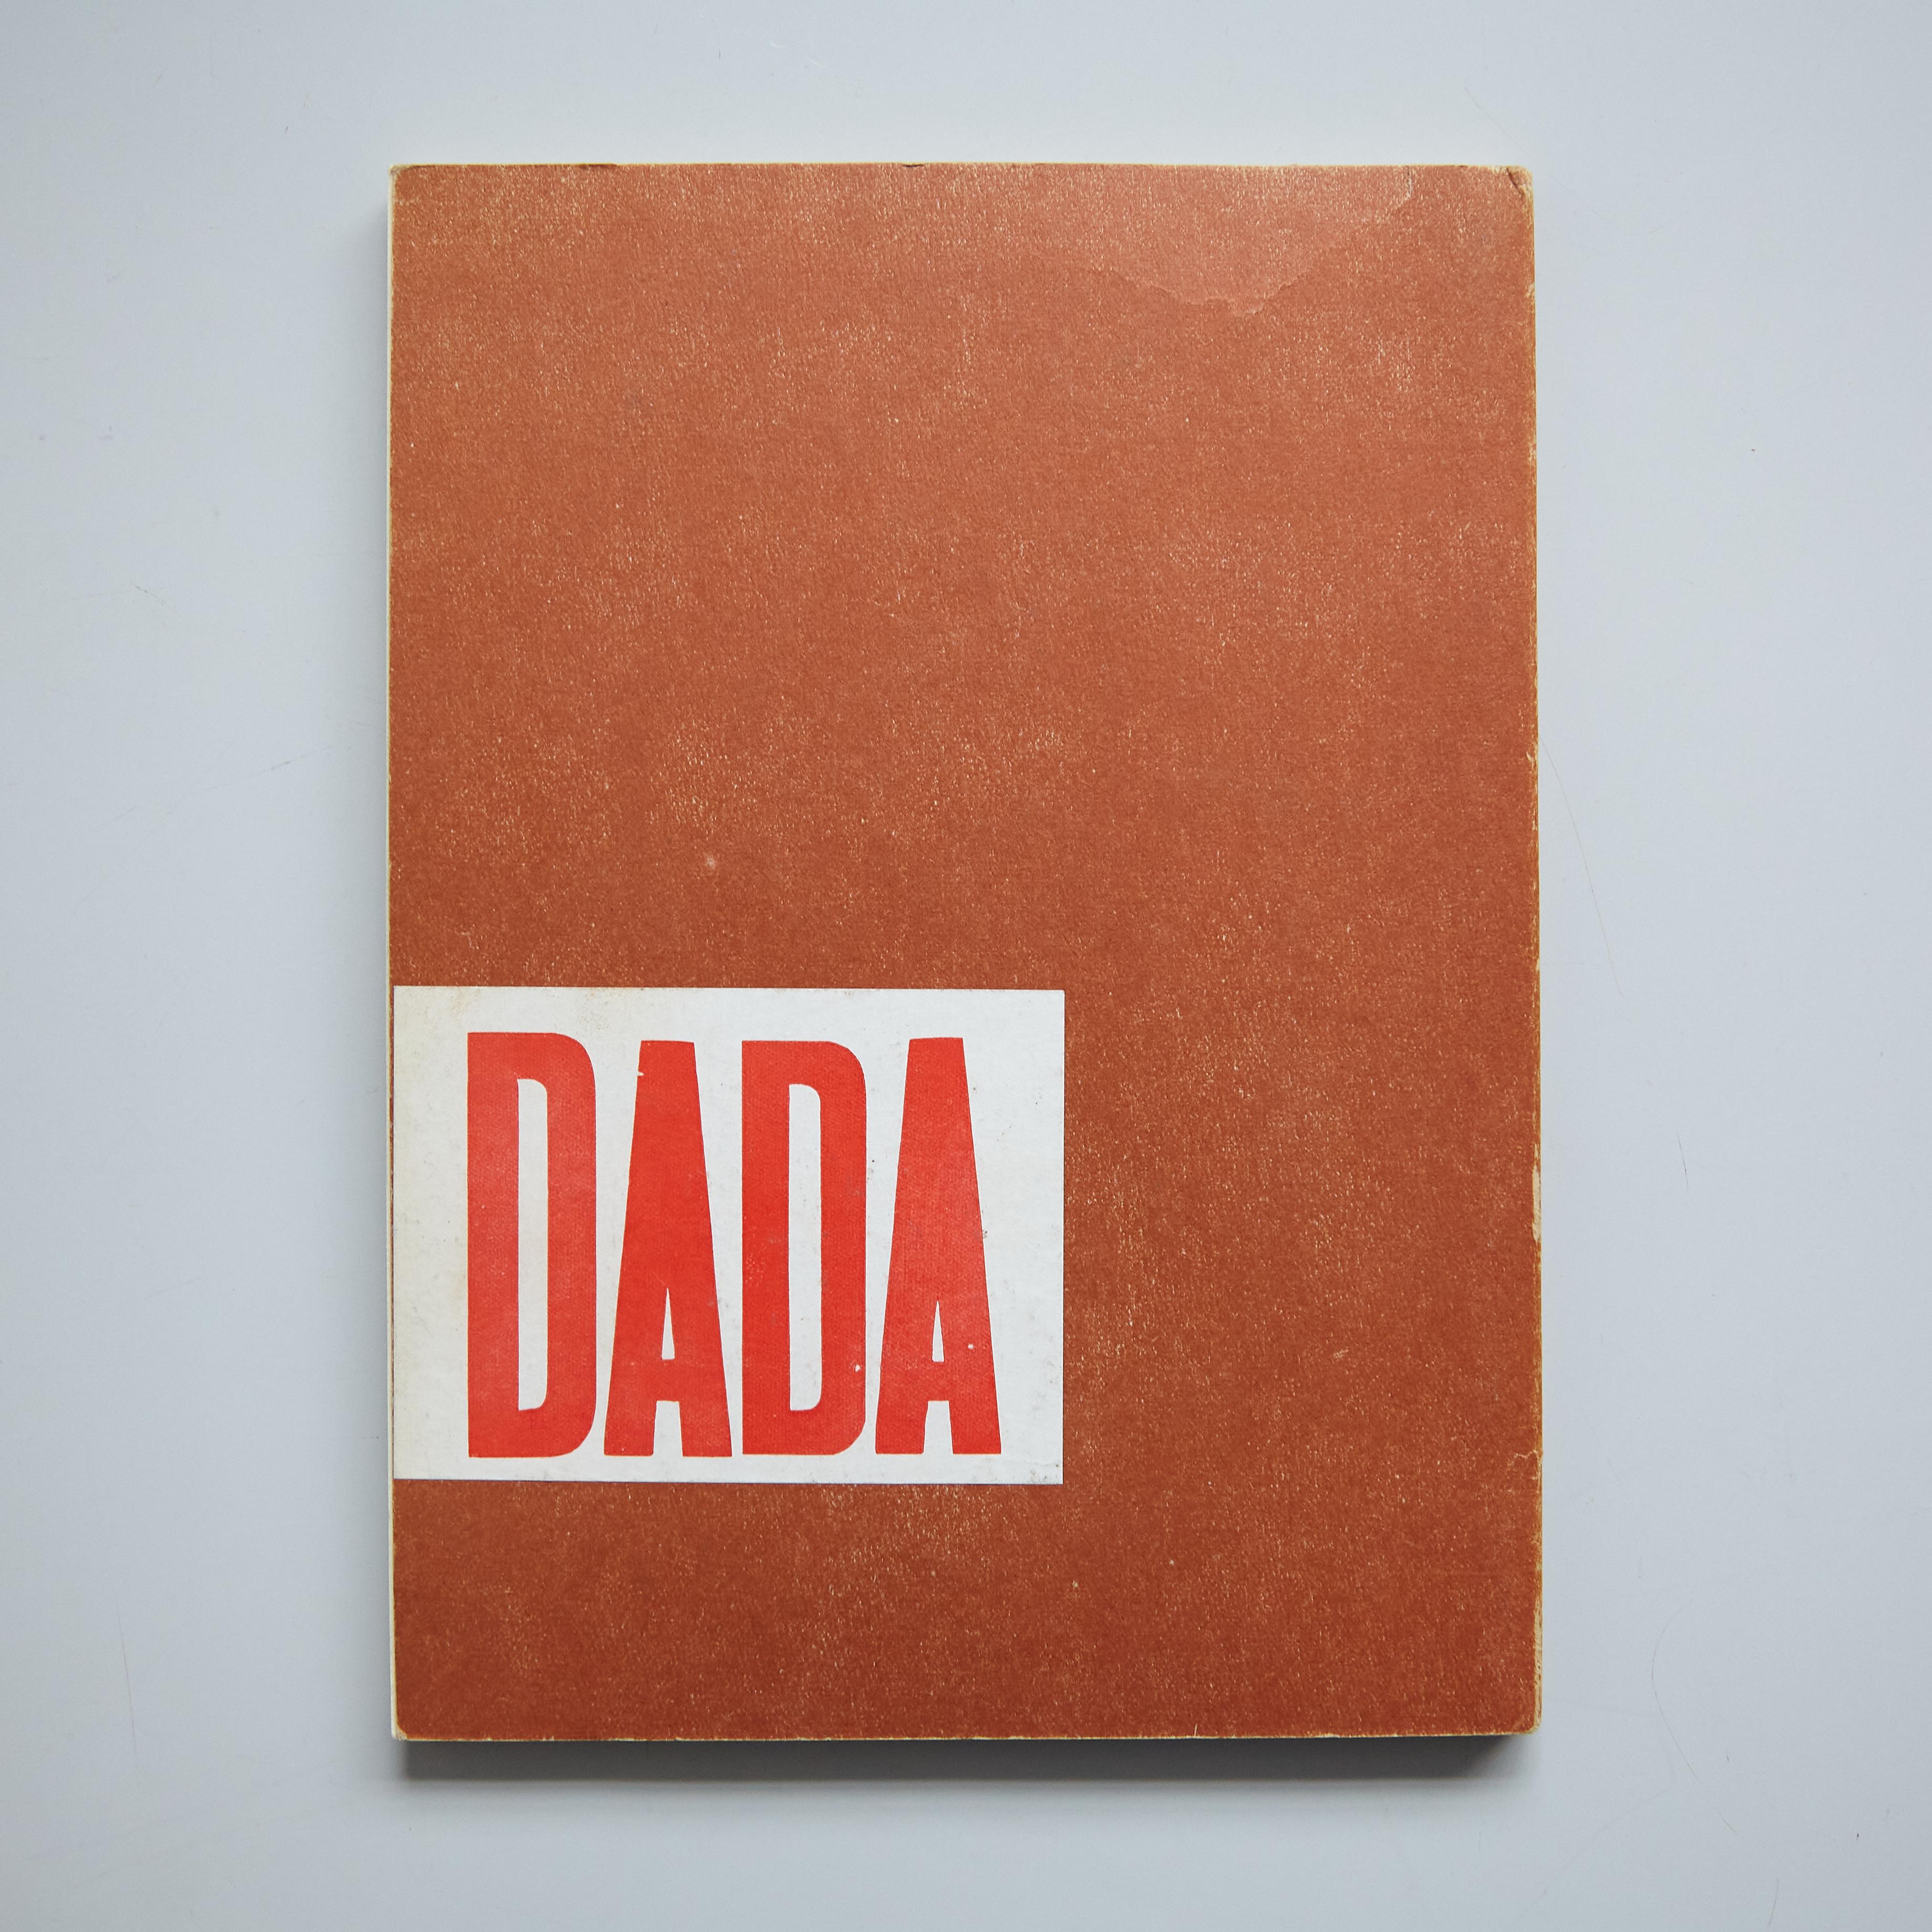 'DADA: Documenting a Movement' original title 'DADA: Dokumente einer Bewegung' book by various authors.
Published by Art Association for the Rhineland and Westphalia (Germany).

Manufactured in Germany, circa 1958.

In good original condition, with